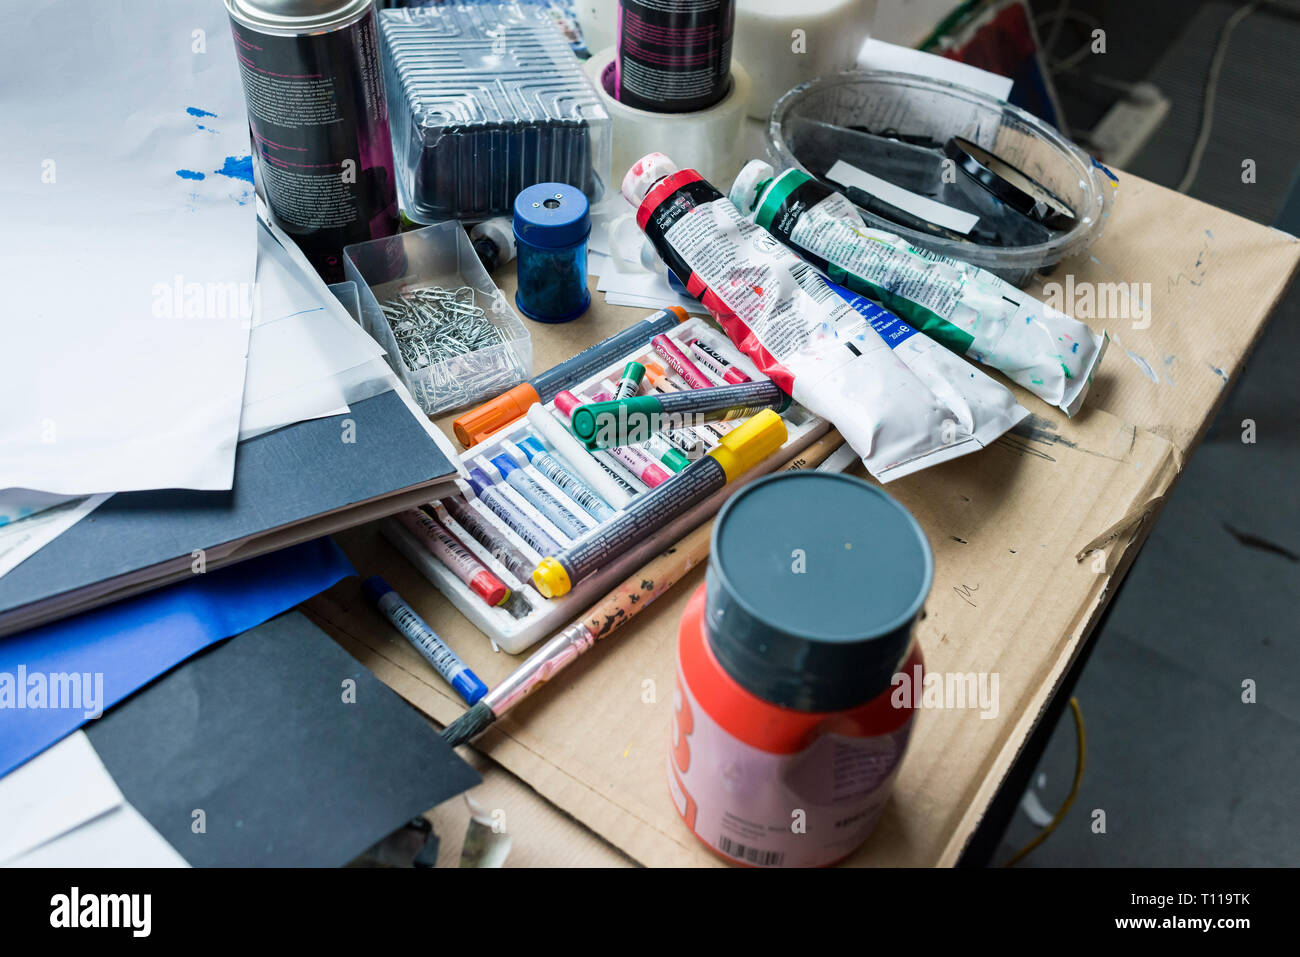 details and images of the art room of a college Stock Photo